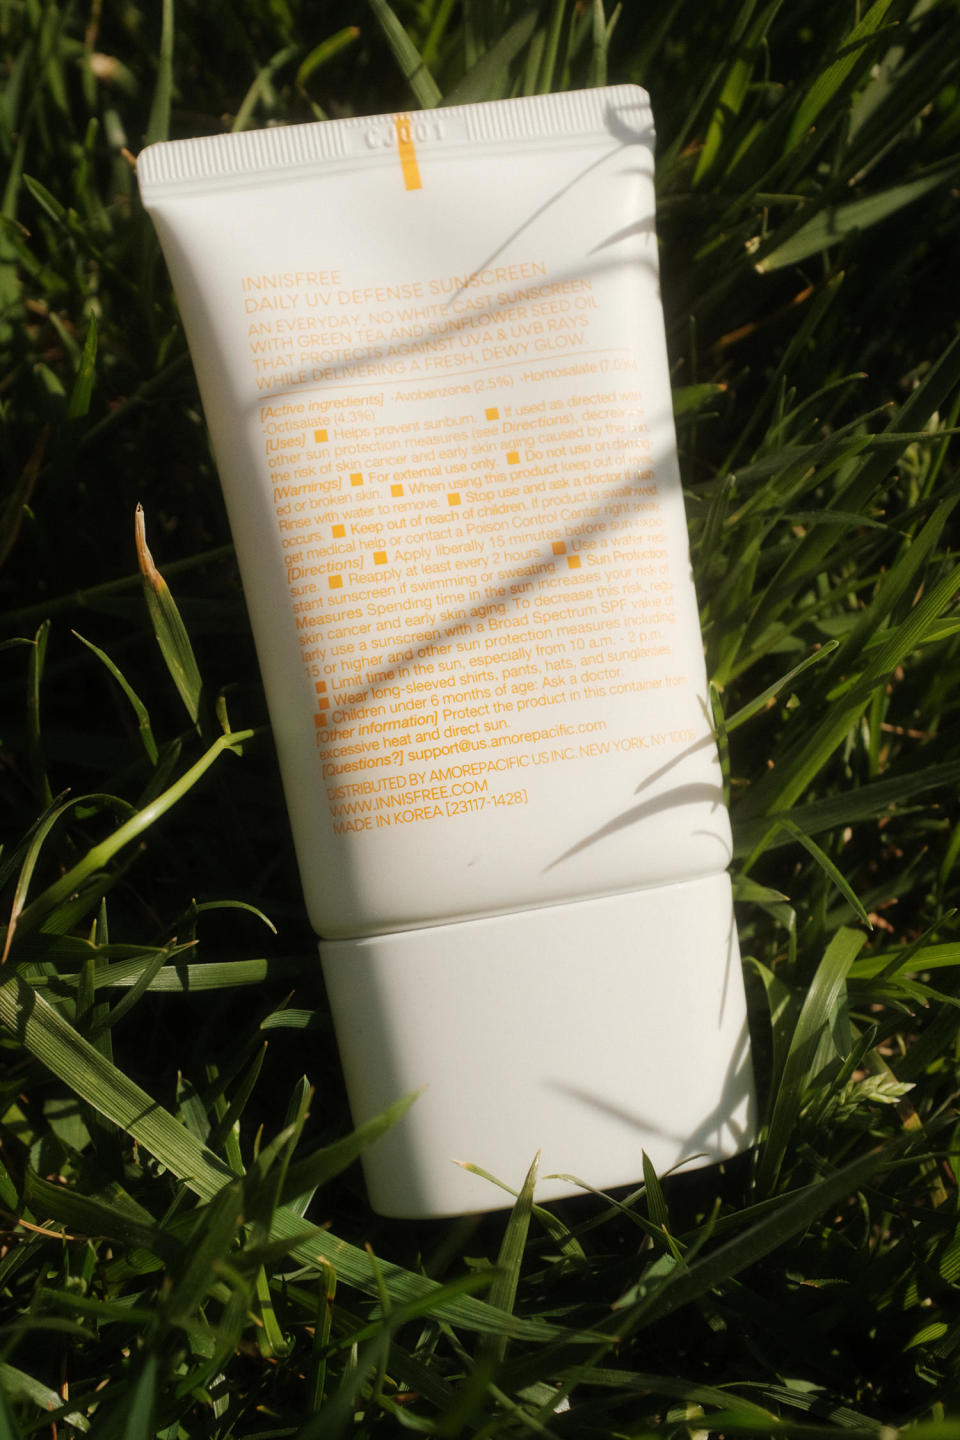 The back of an Innisfree brand bottle of sunscreen. (Chelsea Stahl and Elise Wrabetz / NBC News)